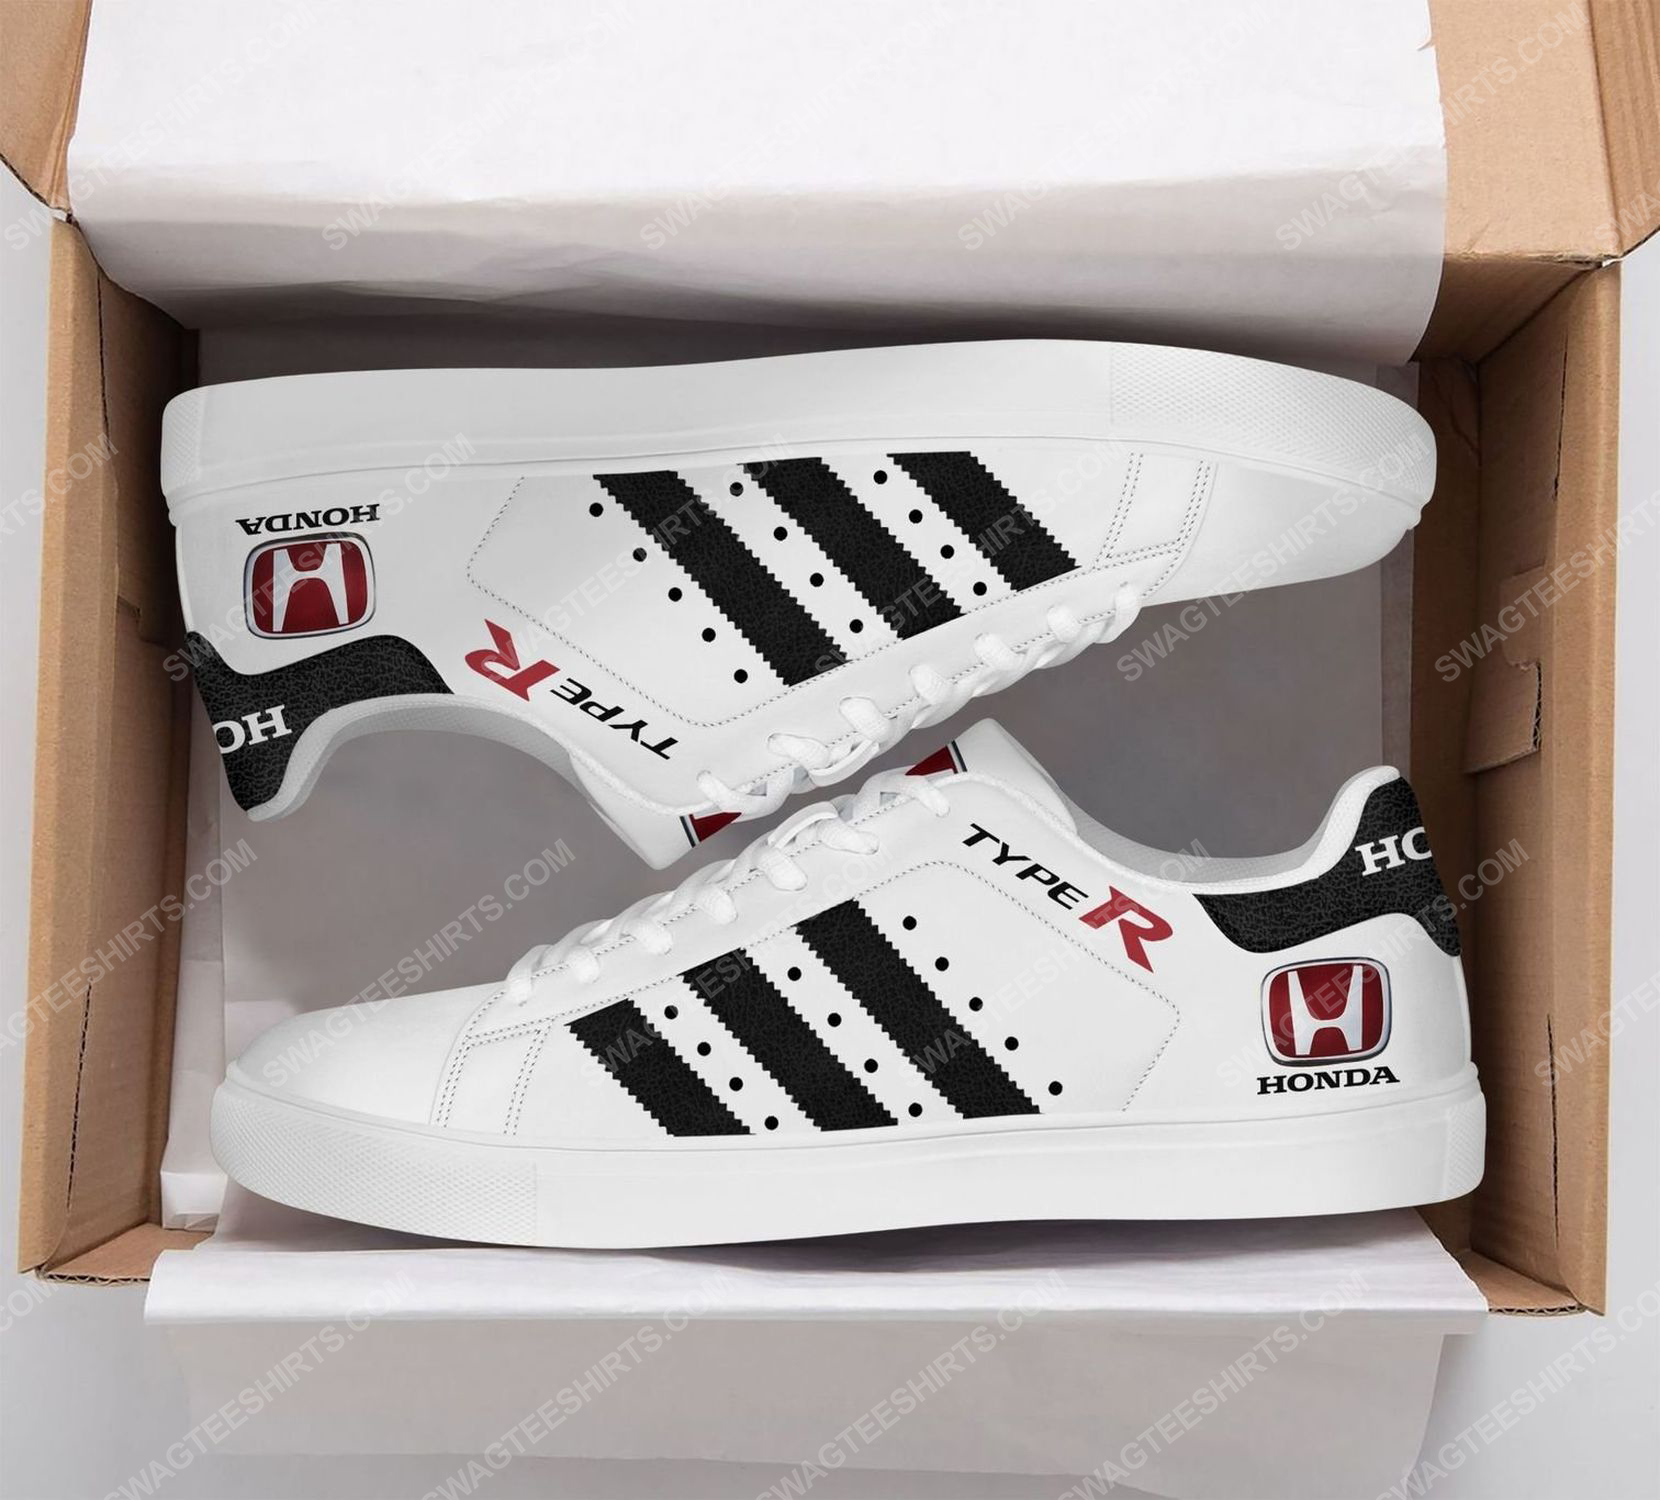 [special edition] Honda civic type r version white stan smith shoes – Maria